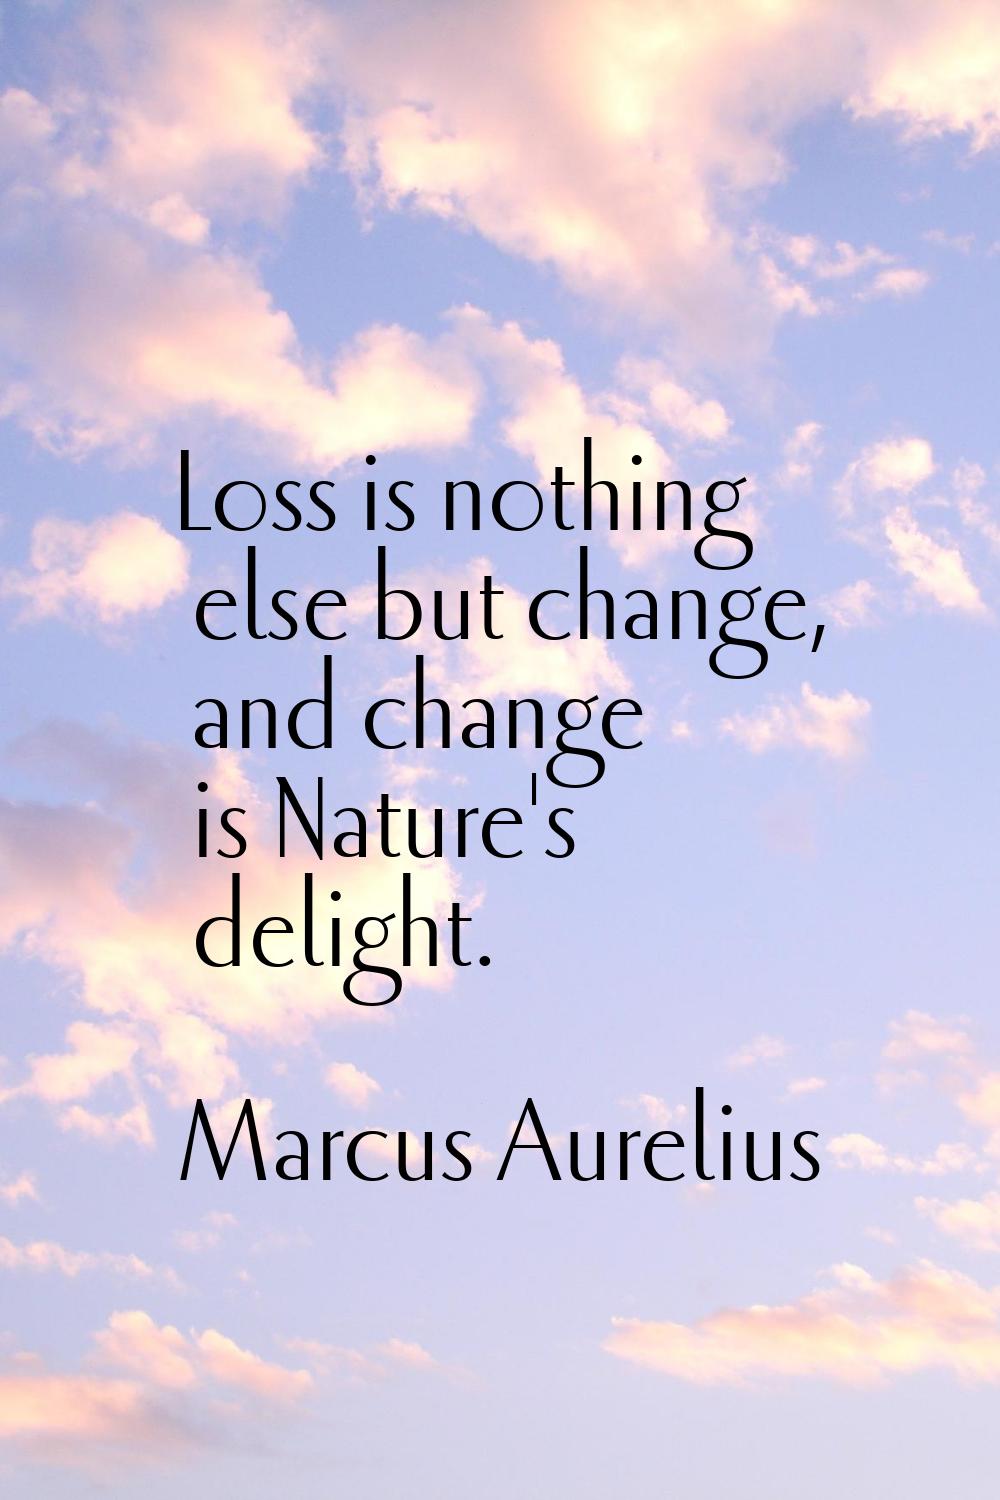 Loss is nothing else but change, and change is Nature's delight.